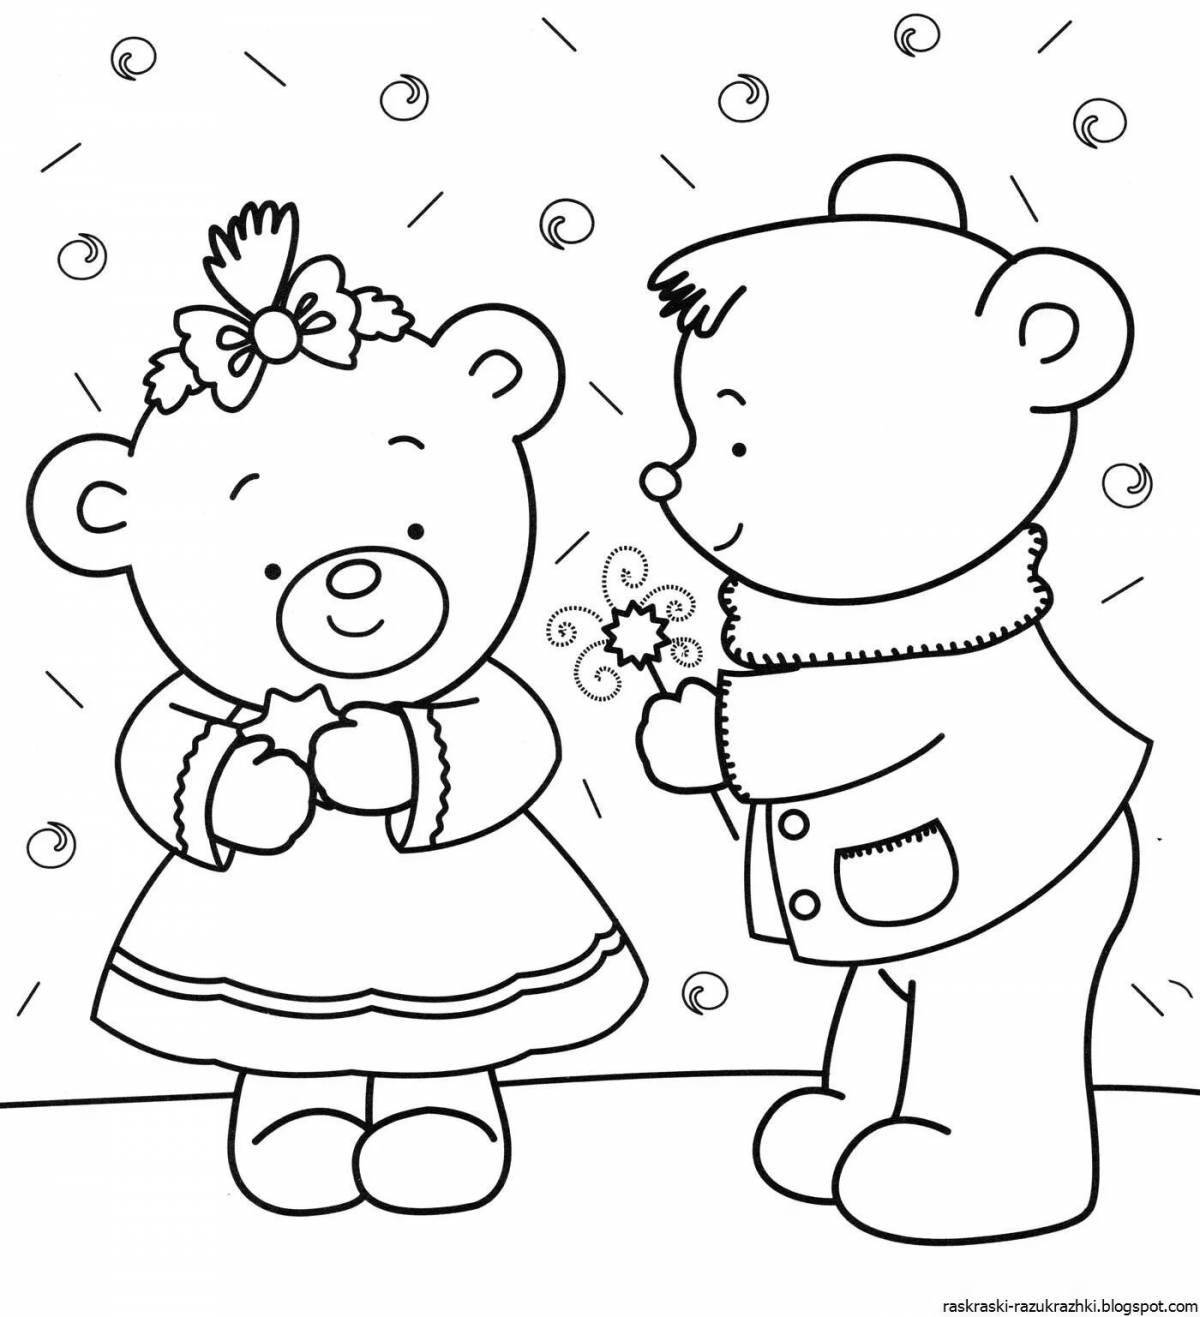 Exquisite bear coloring book for girls